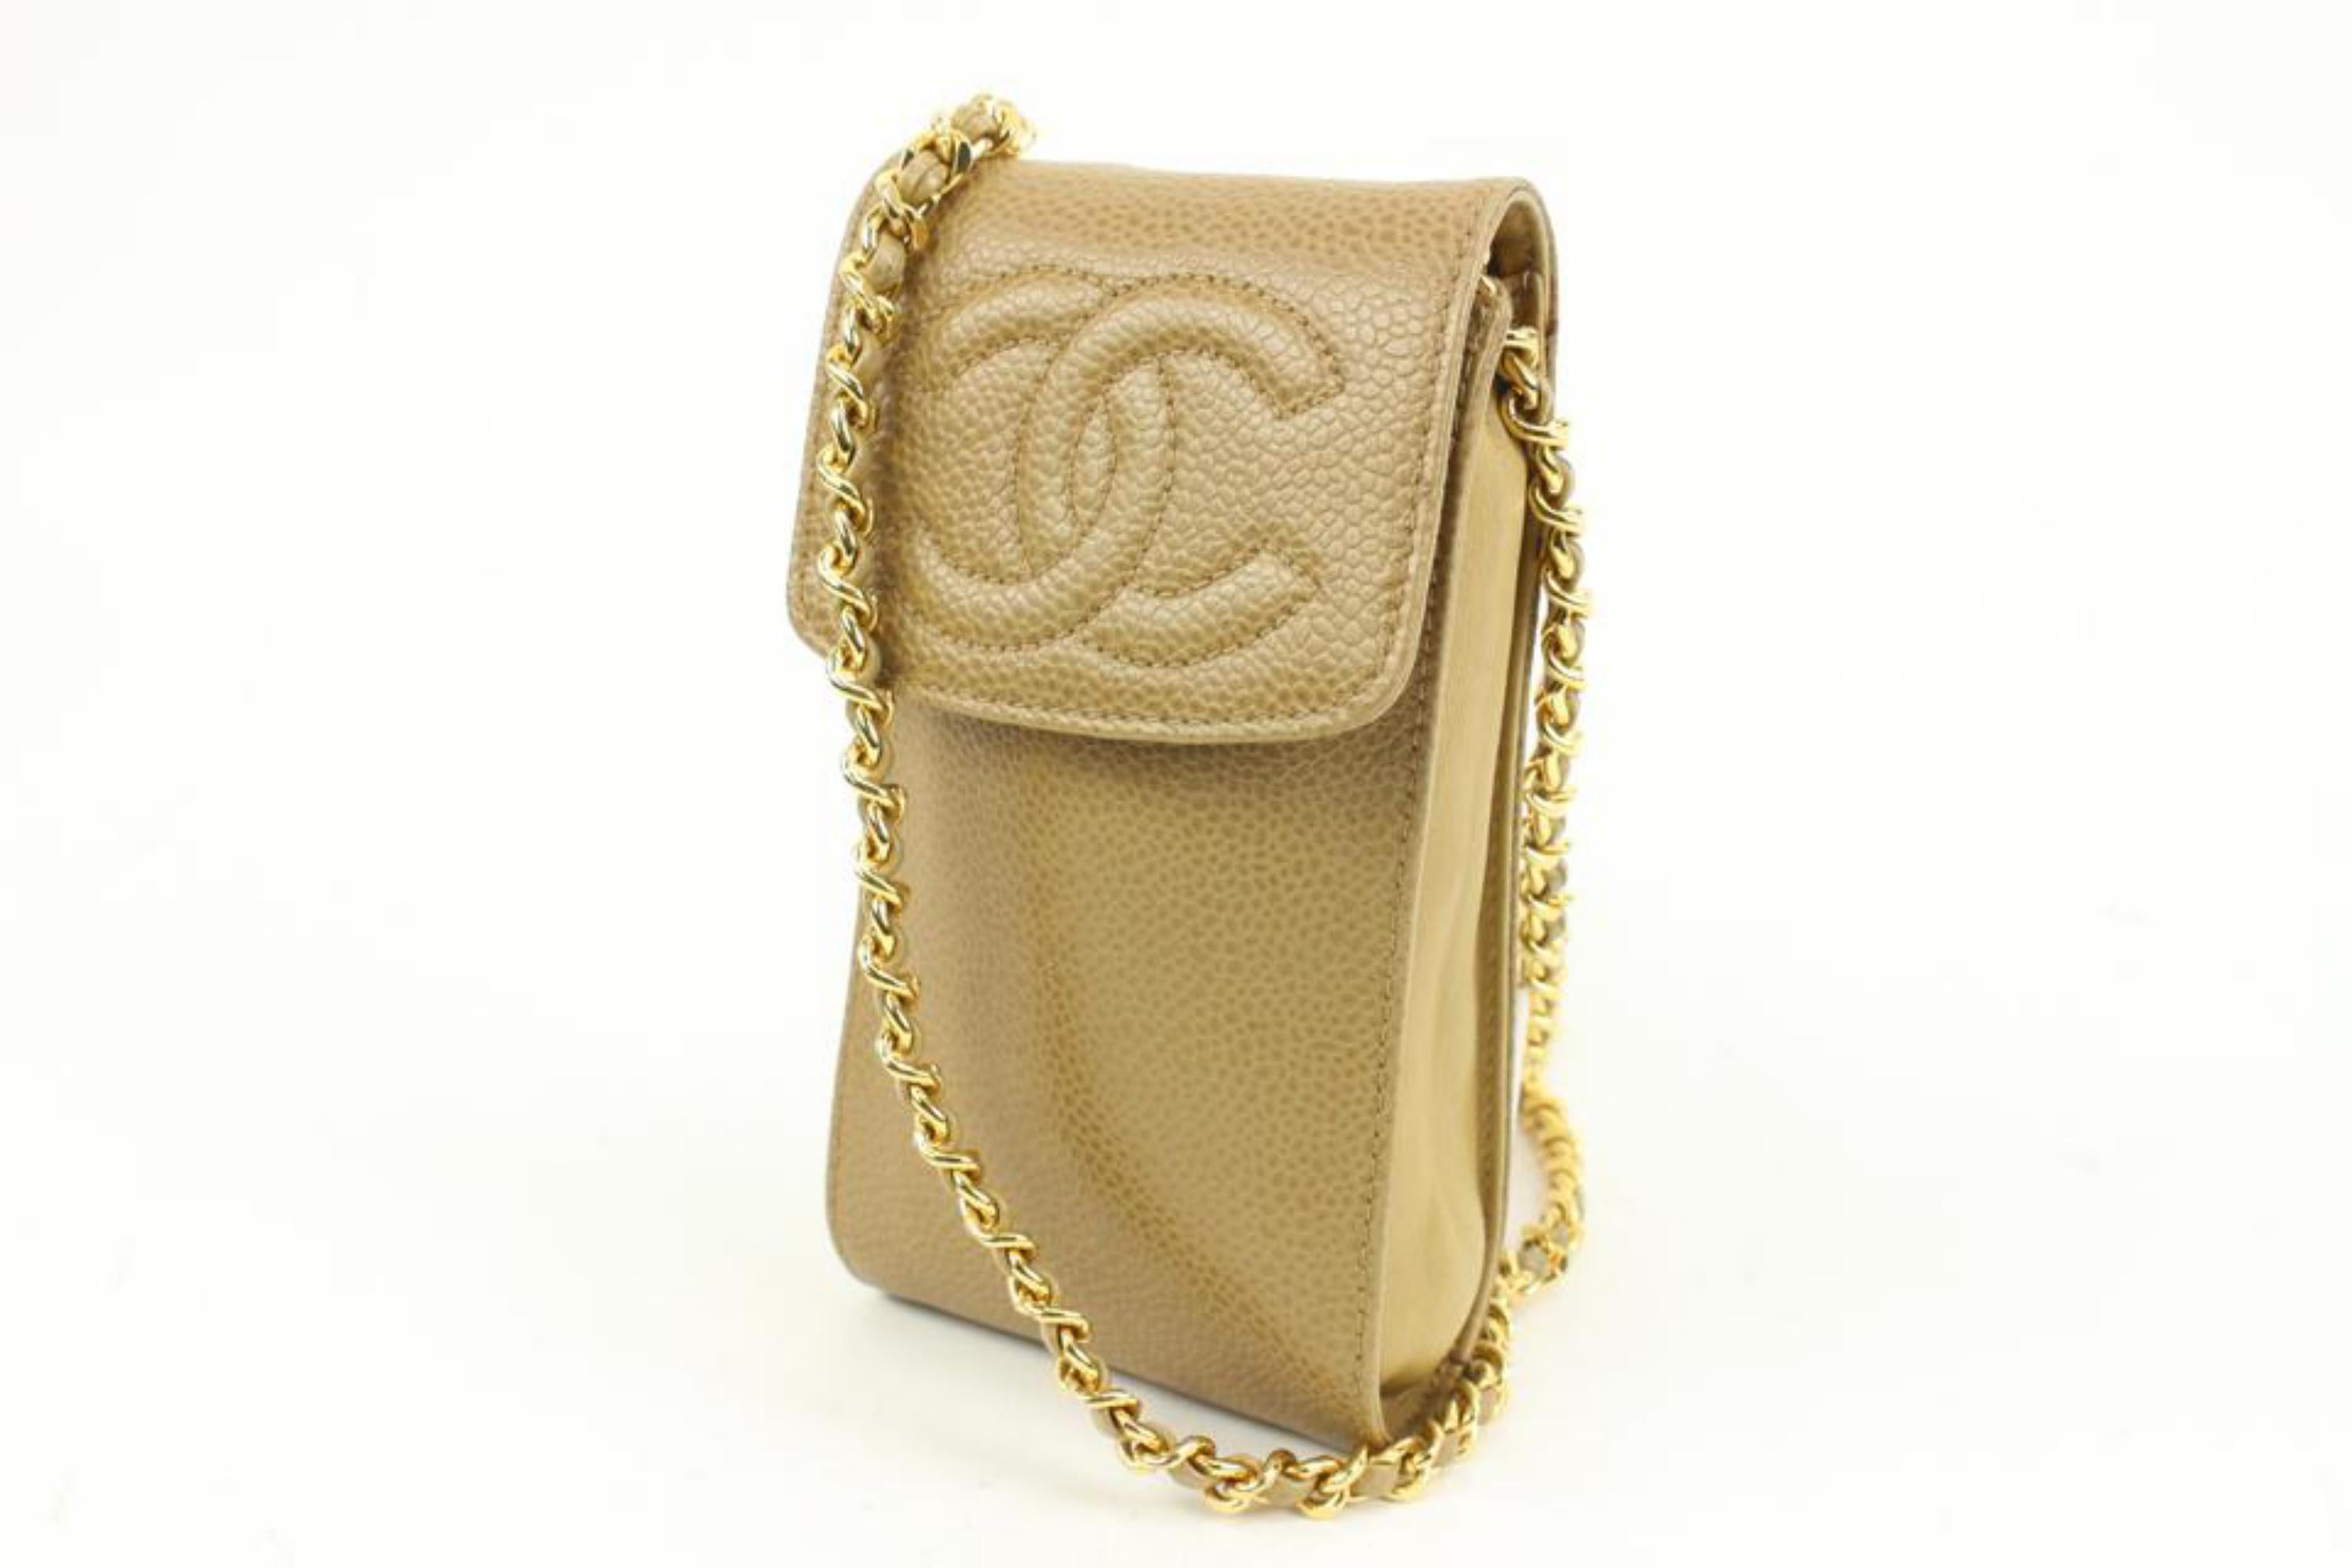 Chanel Light Brown Beige Caviar CC Mini Crossbody Mobile Pouch Bag 48ck45
Date Code/Serial Number: 4490834
Made In: Italy
Measurements: Length:  3.2